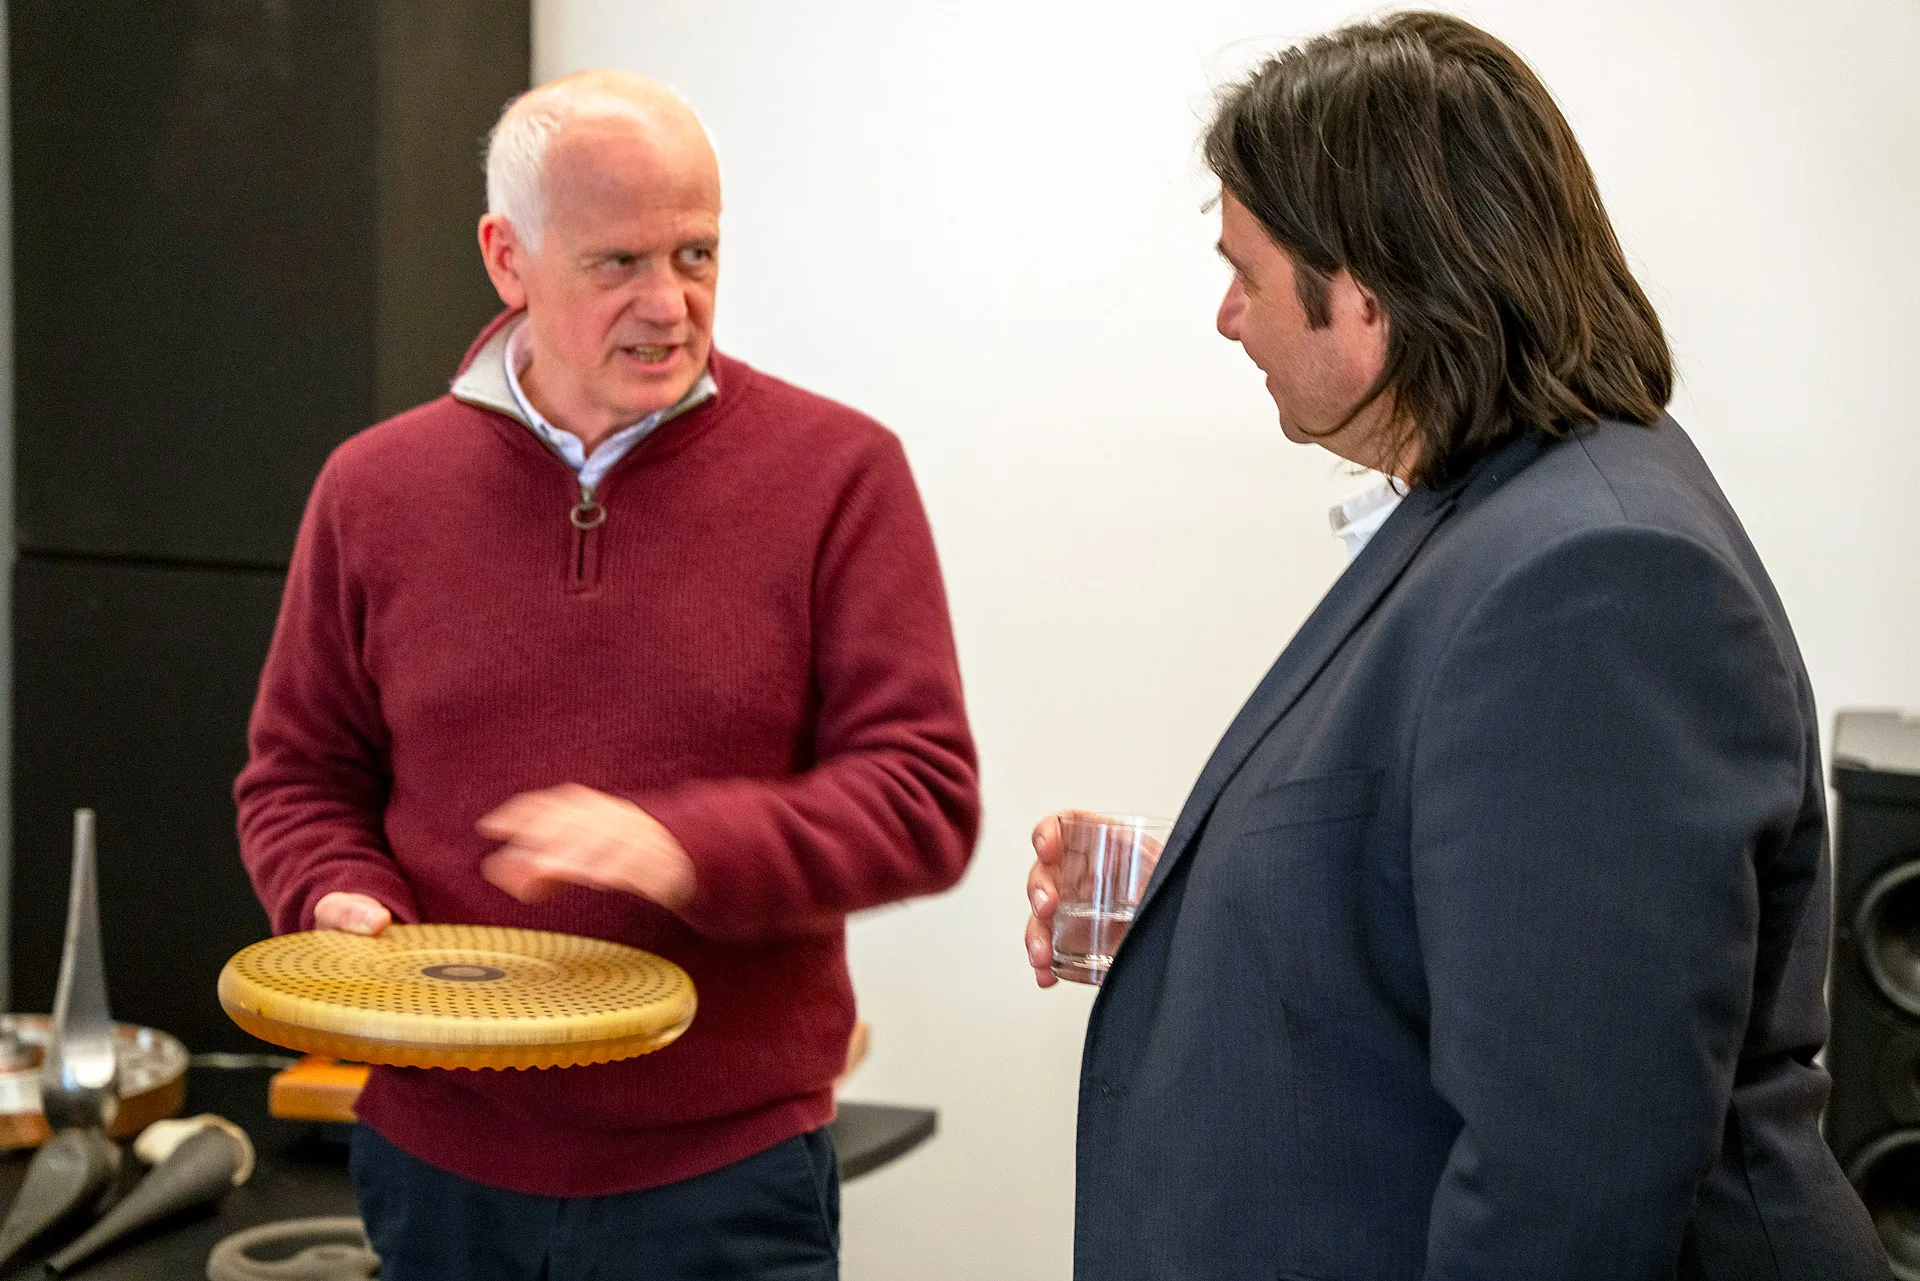 Design Director Craig Milnes showing George one of the very first turntable platter designs developed for the GMT System under the grant project entitled 'The Mondrian Project'.